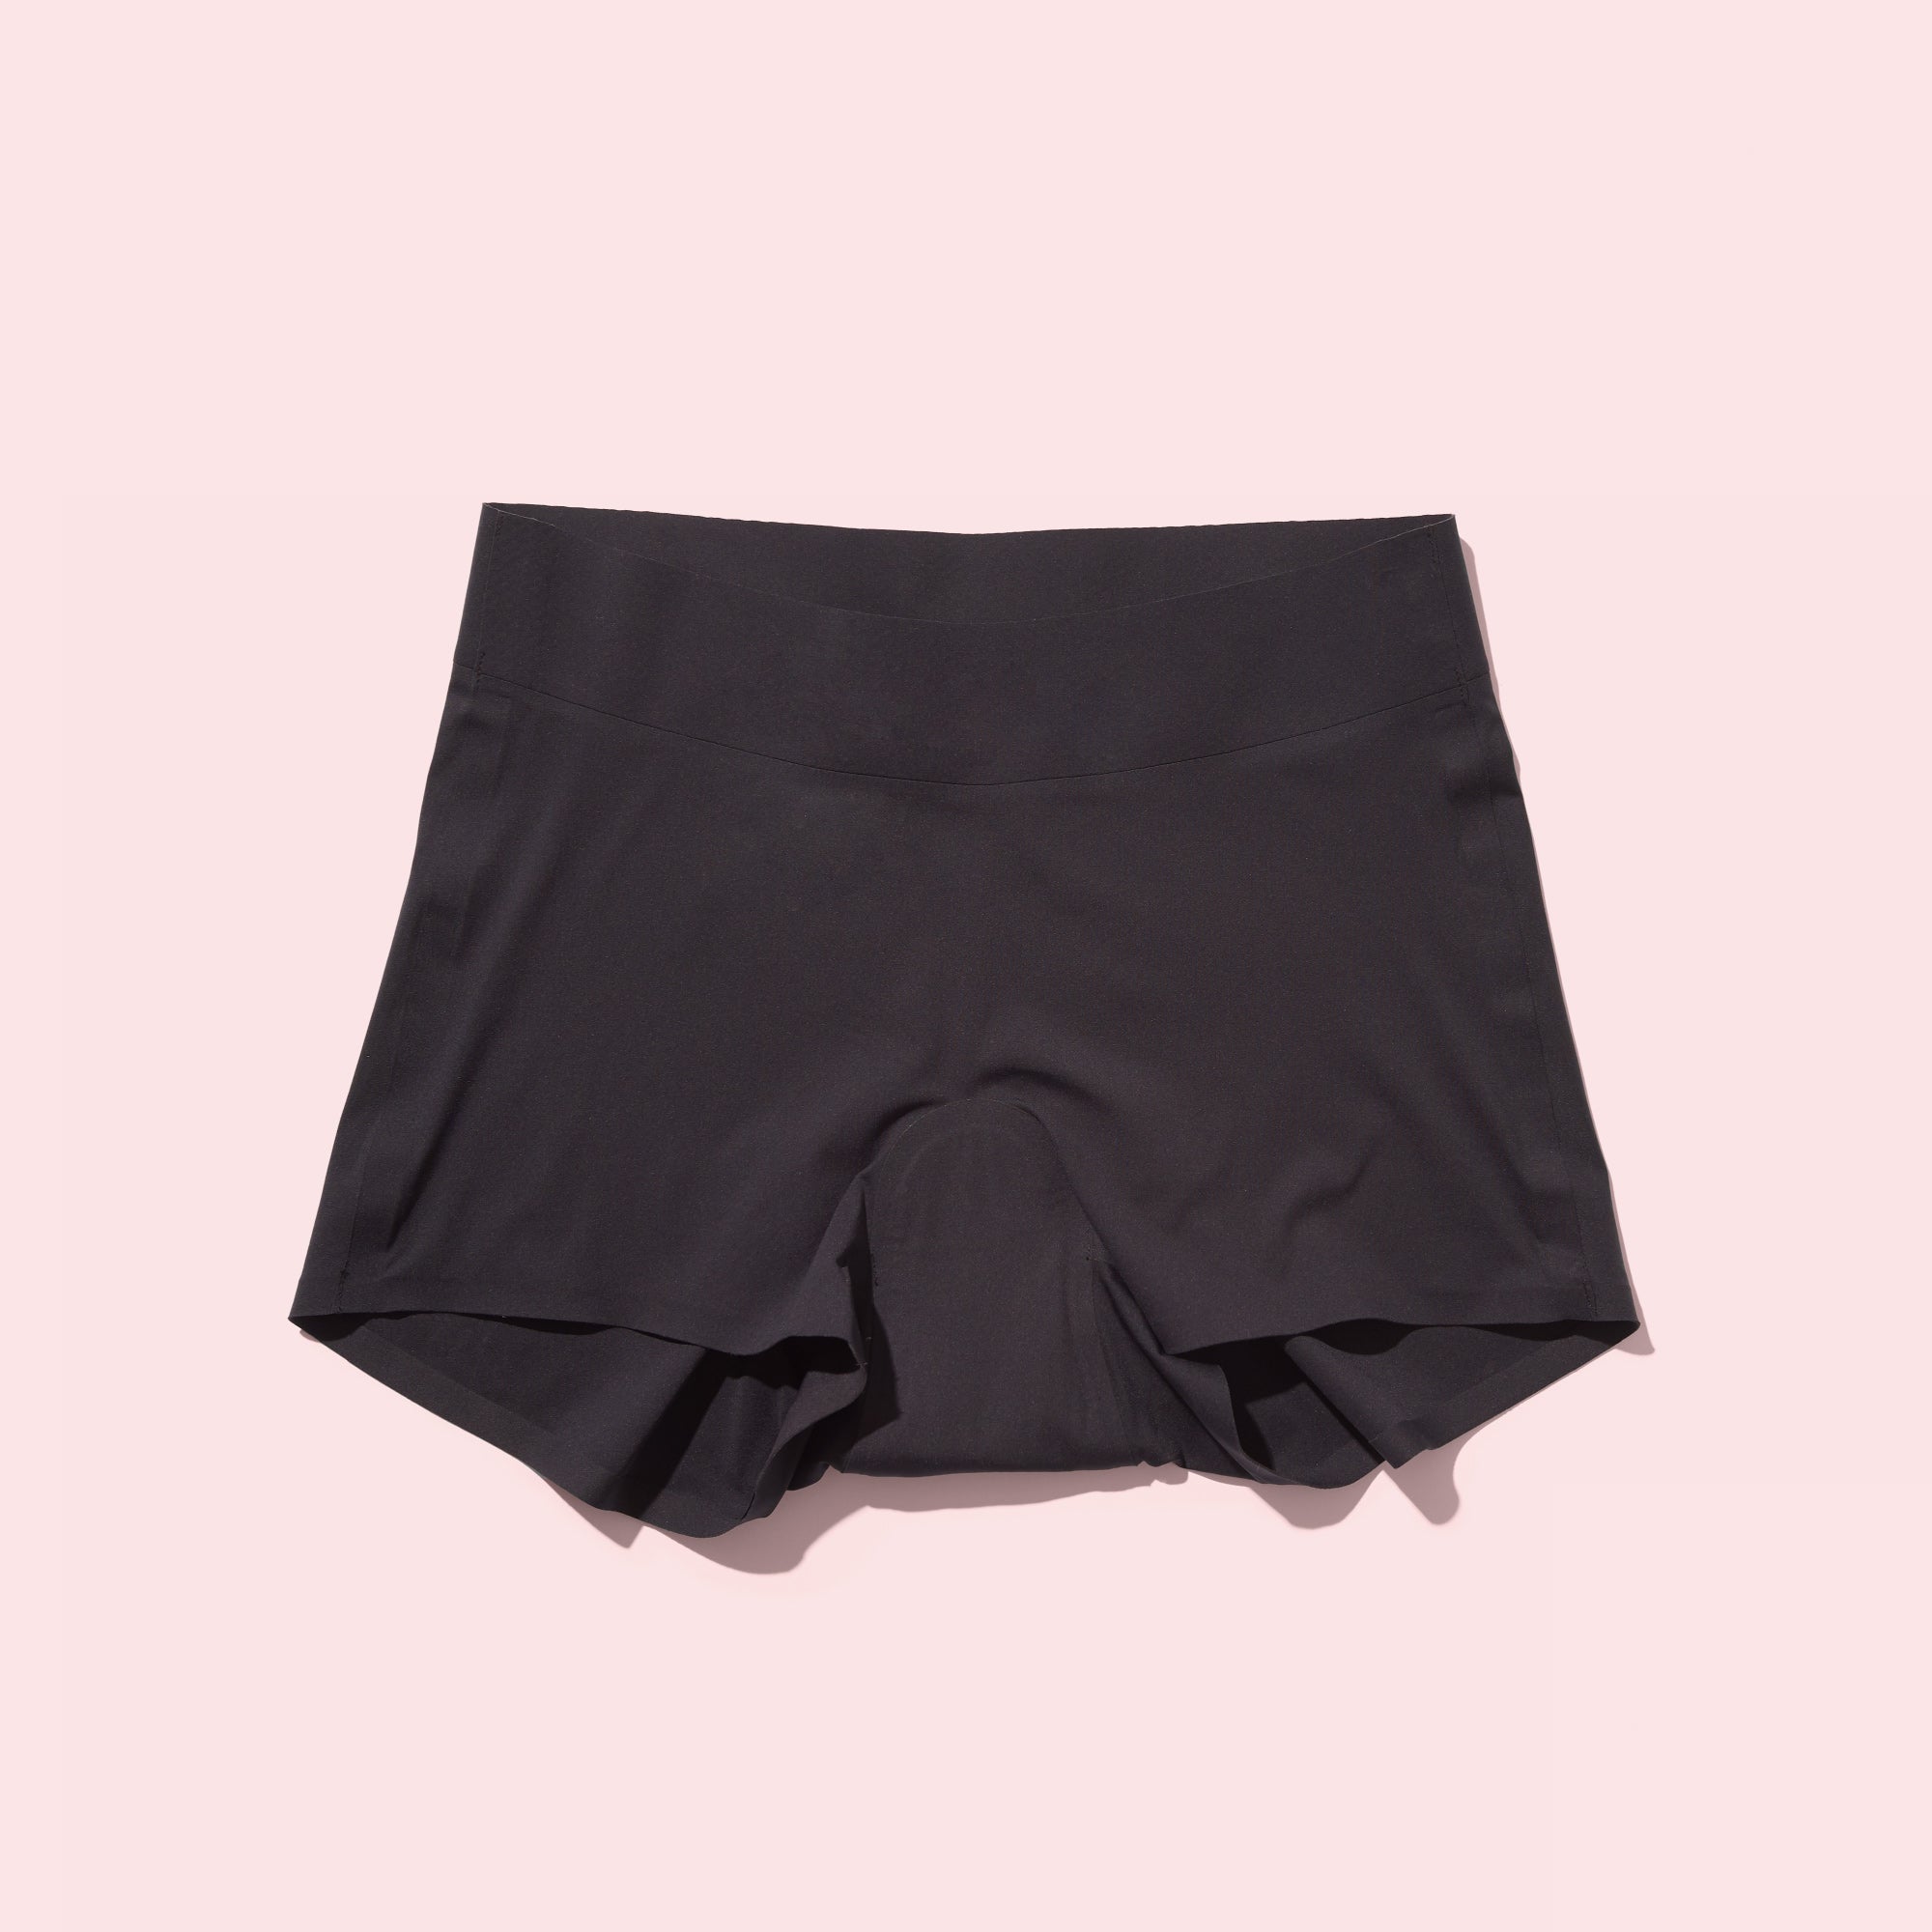 The Sleepover Short - Super Comfortable and absorbent Period Shorts ...